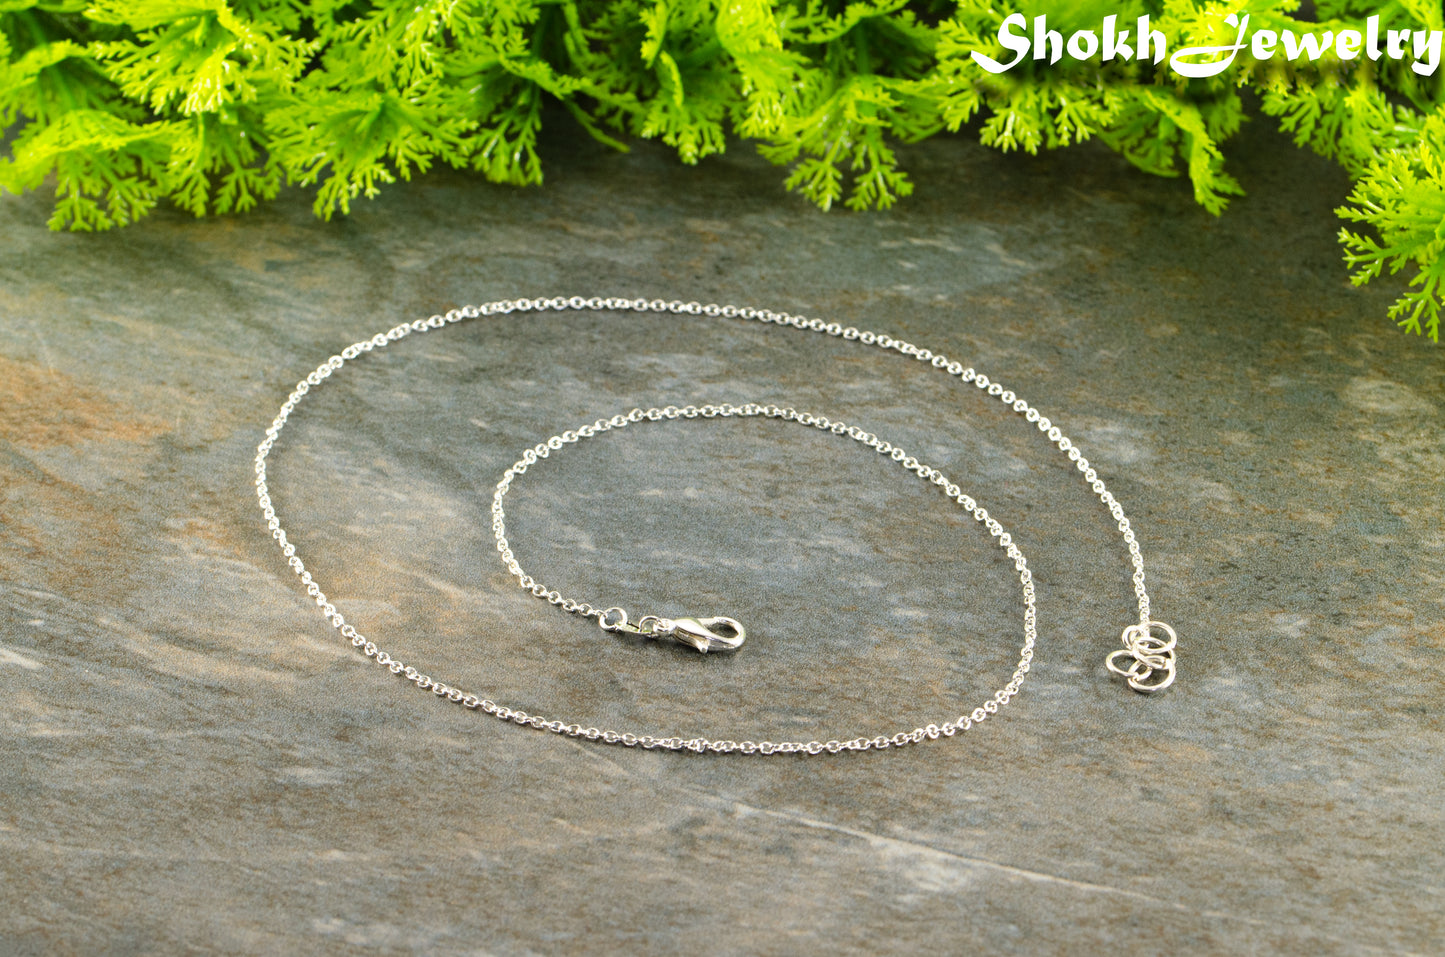 Silver Plated Dainty Chain Choker Necklace with clasp.